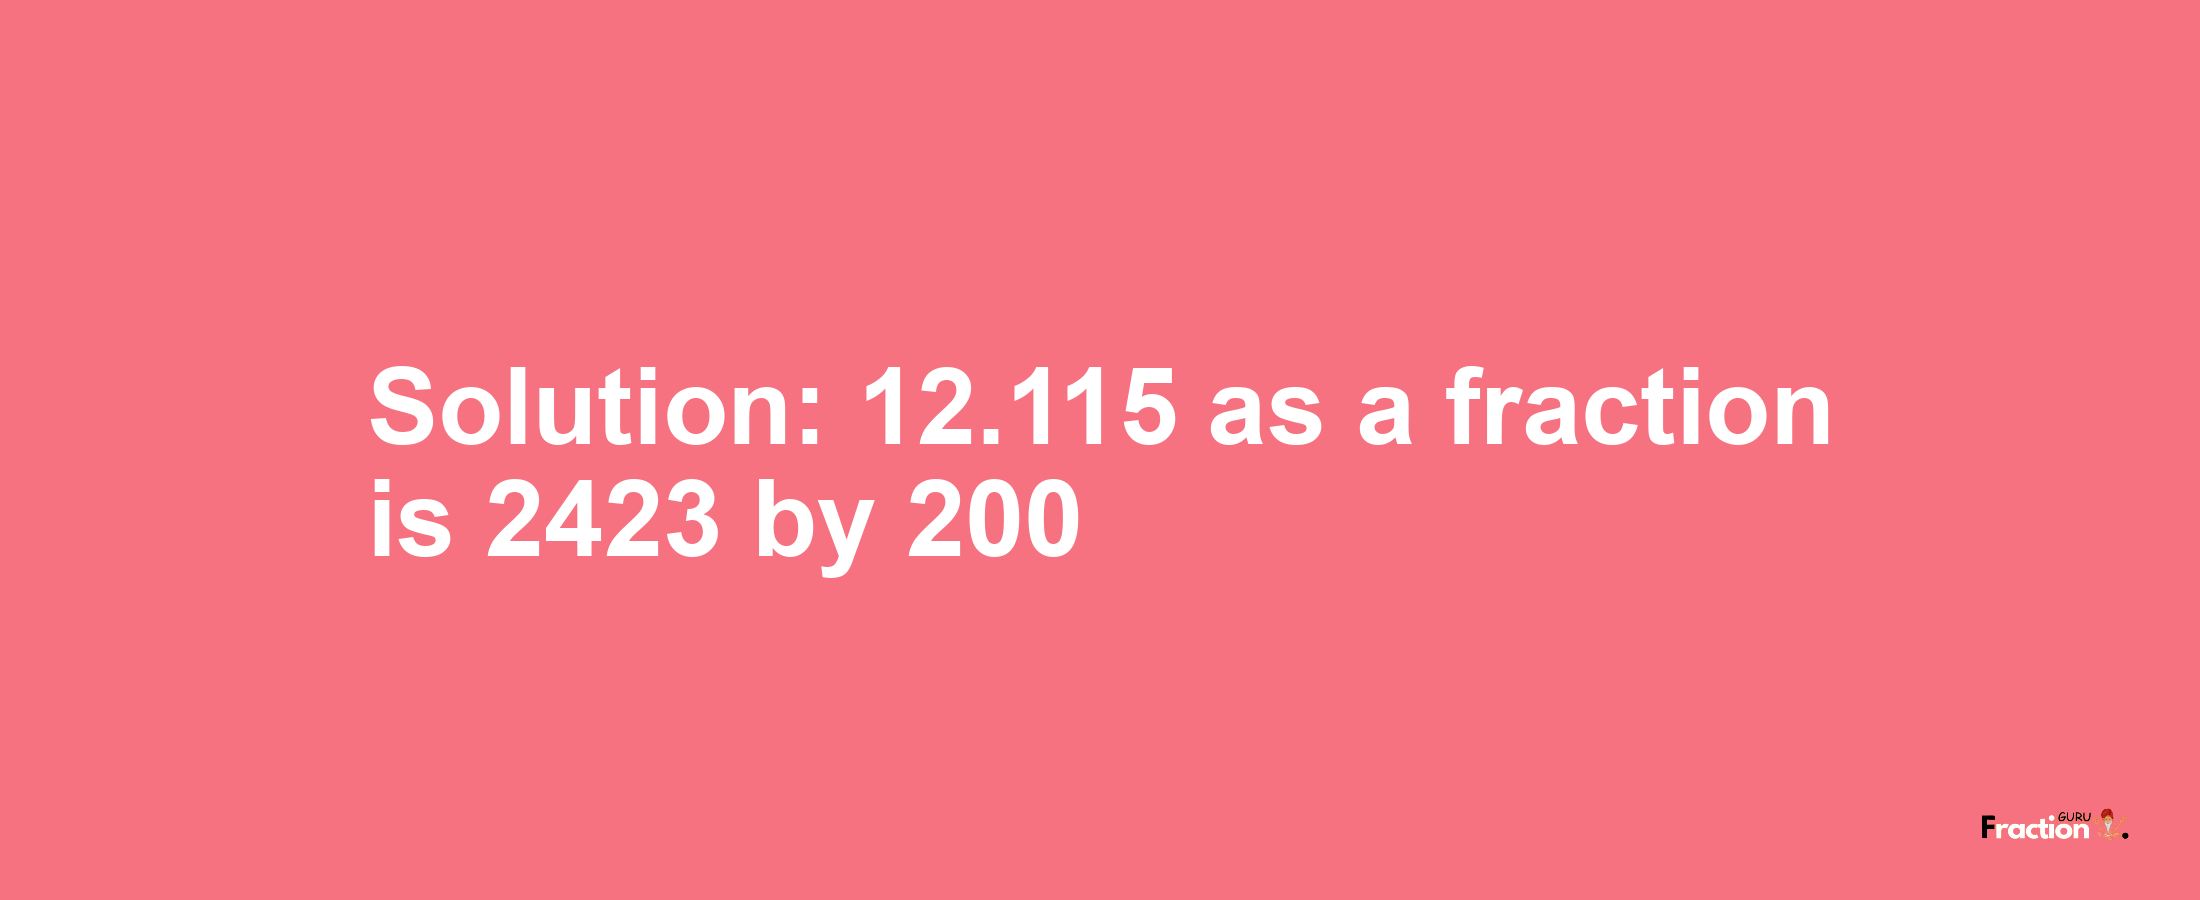 Solution:12.115 as a fraction is 2423/200